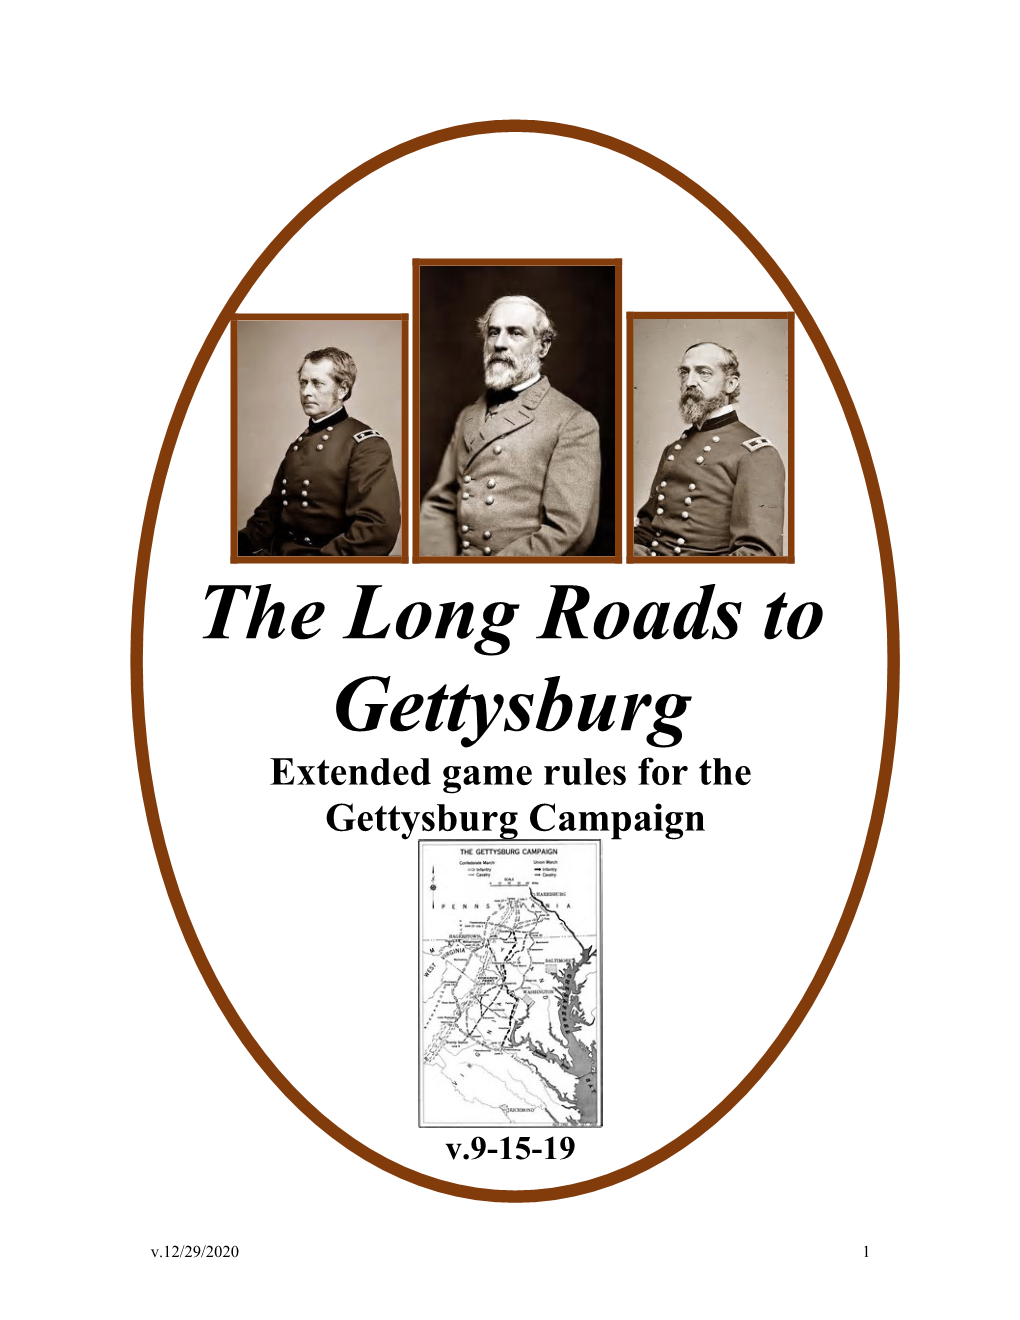 Long Roads to Gettysburg Extended Game Rules for the Gettysburg Campaign